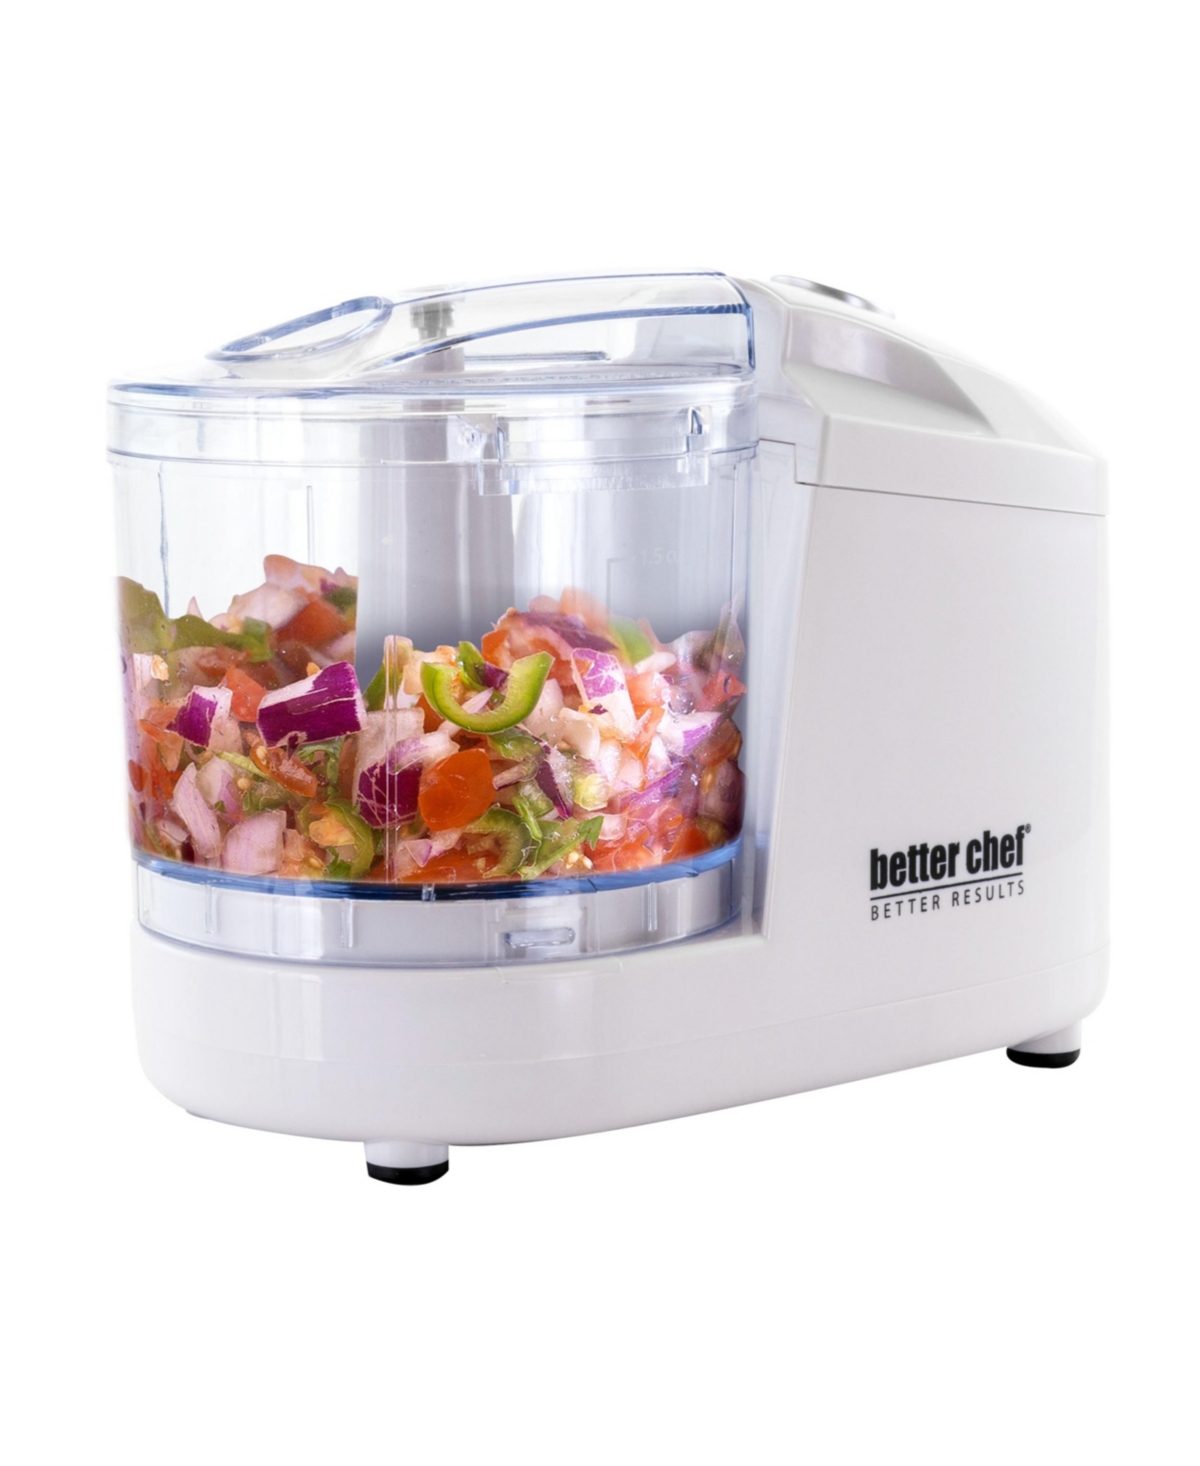 Better Chef 1.5 Cup Compact Chopper in White